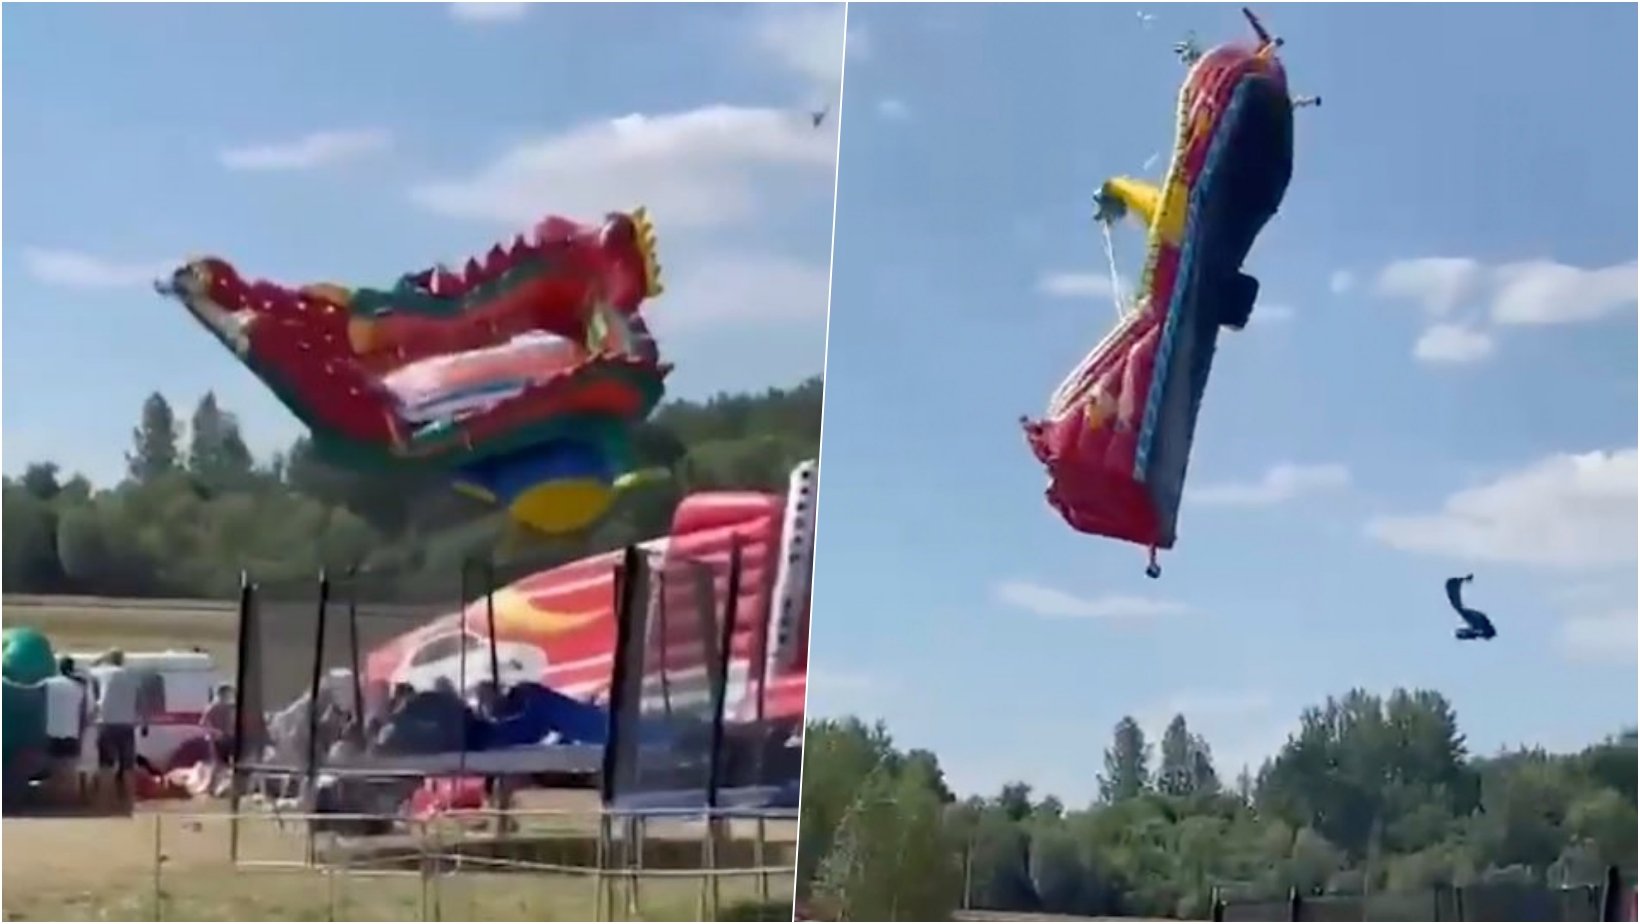 6 facebook cover 3.jpg?resize=412,232 - Horrifying Incident When Strong Wind Blew Bouncy Castles Off, Tossing Children Into The Air 